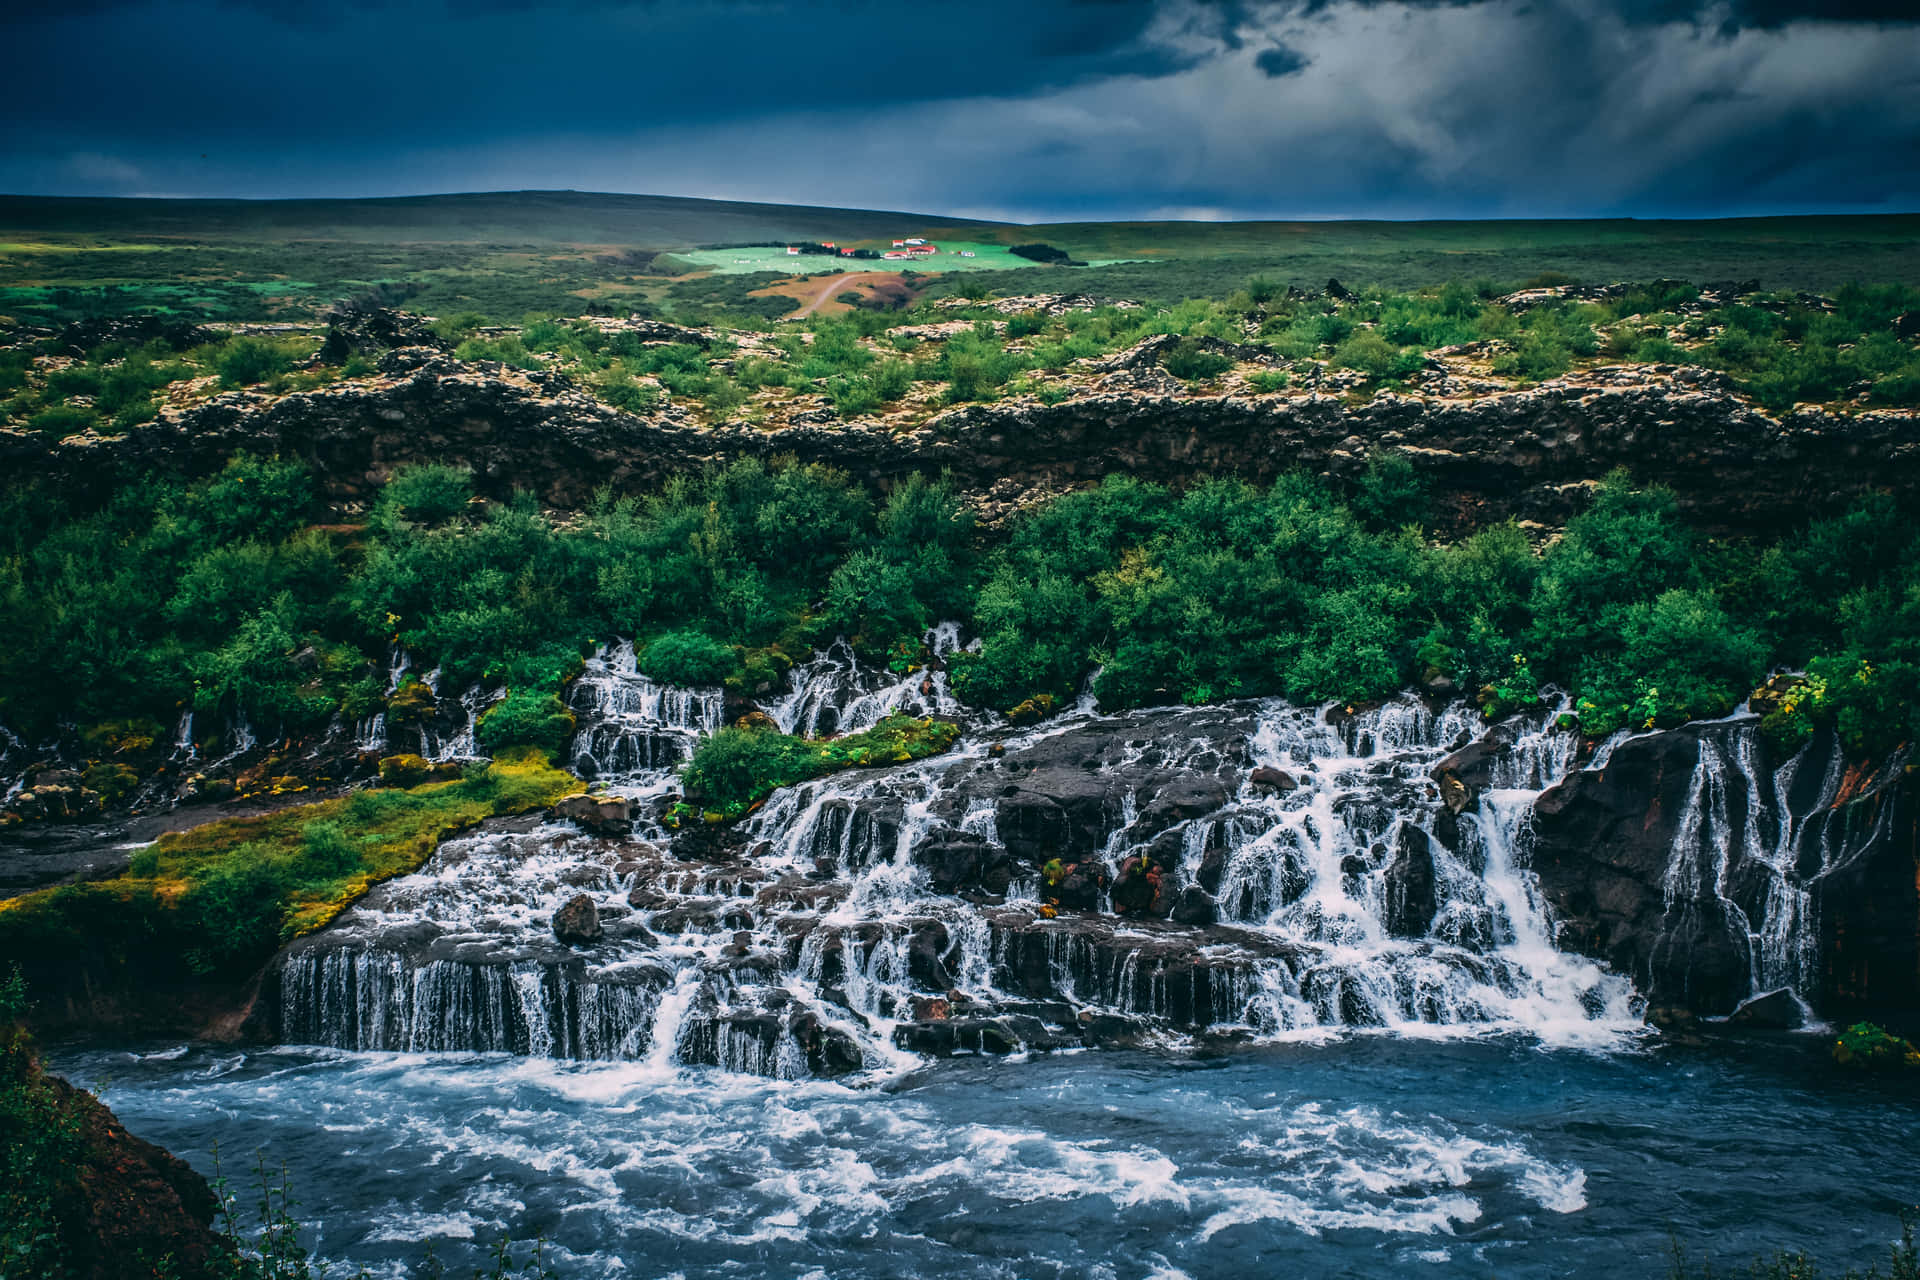 "Exploring the Geological Wilderness of Iceland"